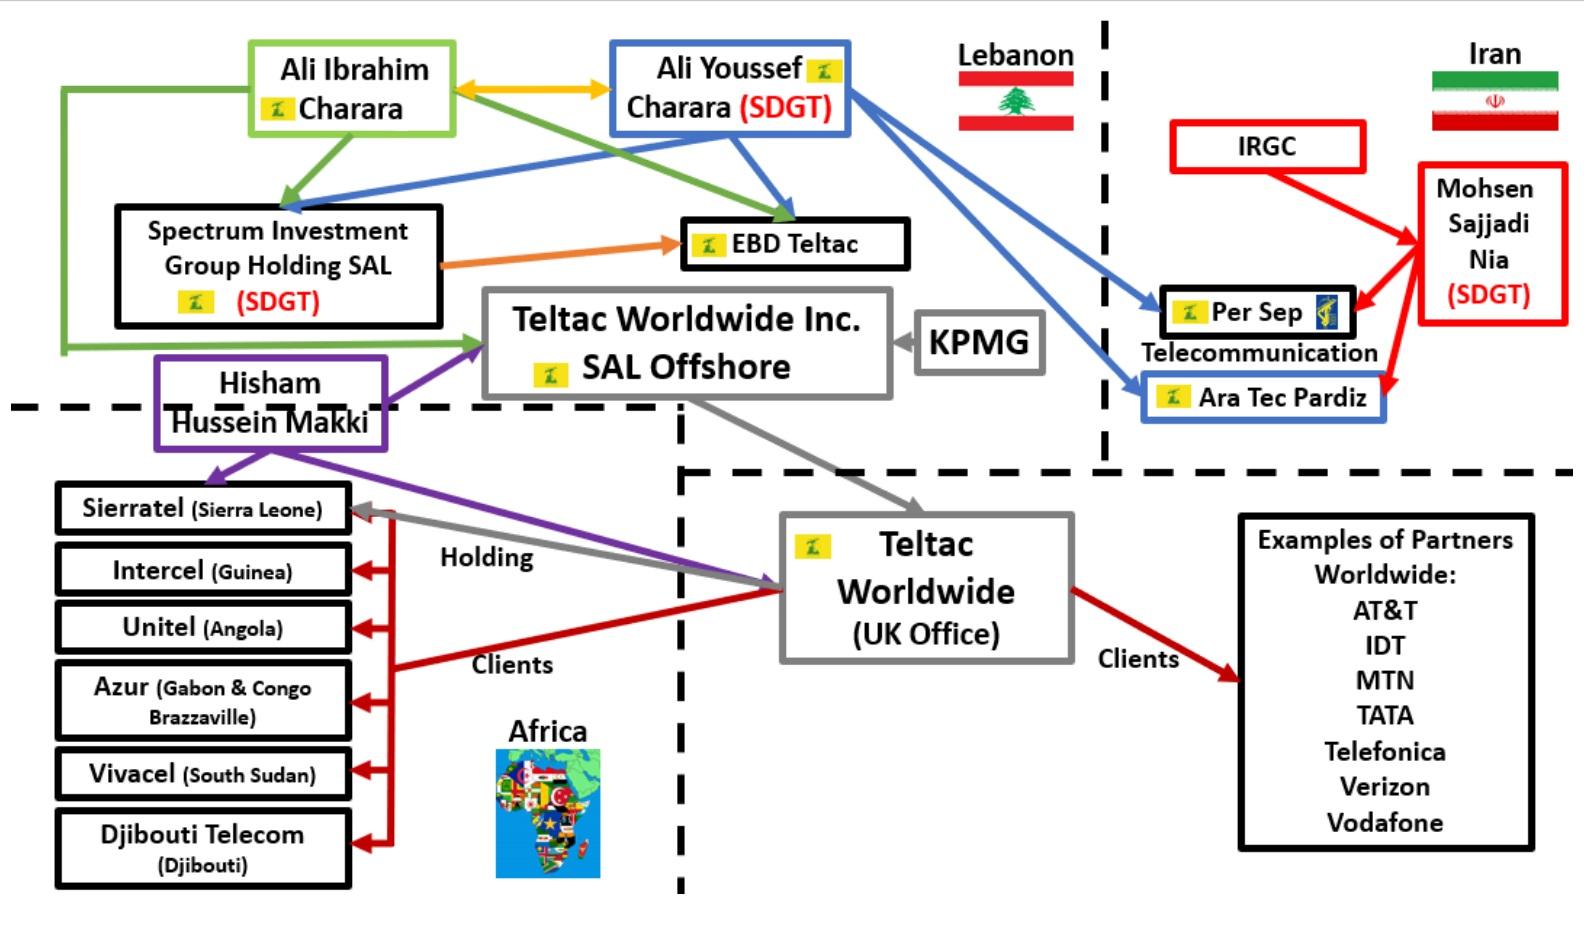 A worldwide Telecommunication structure serves Hezbollah for financing and intel collection